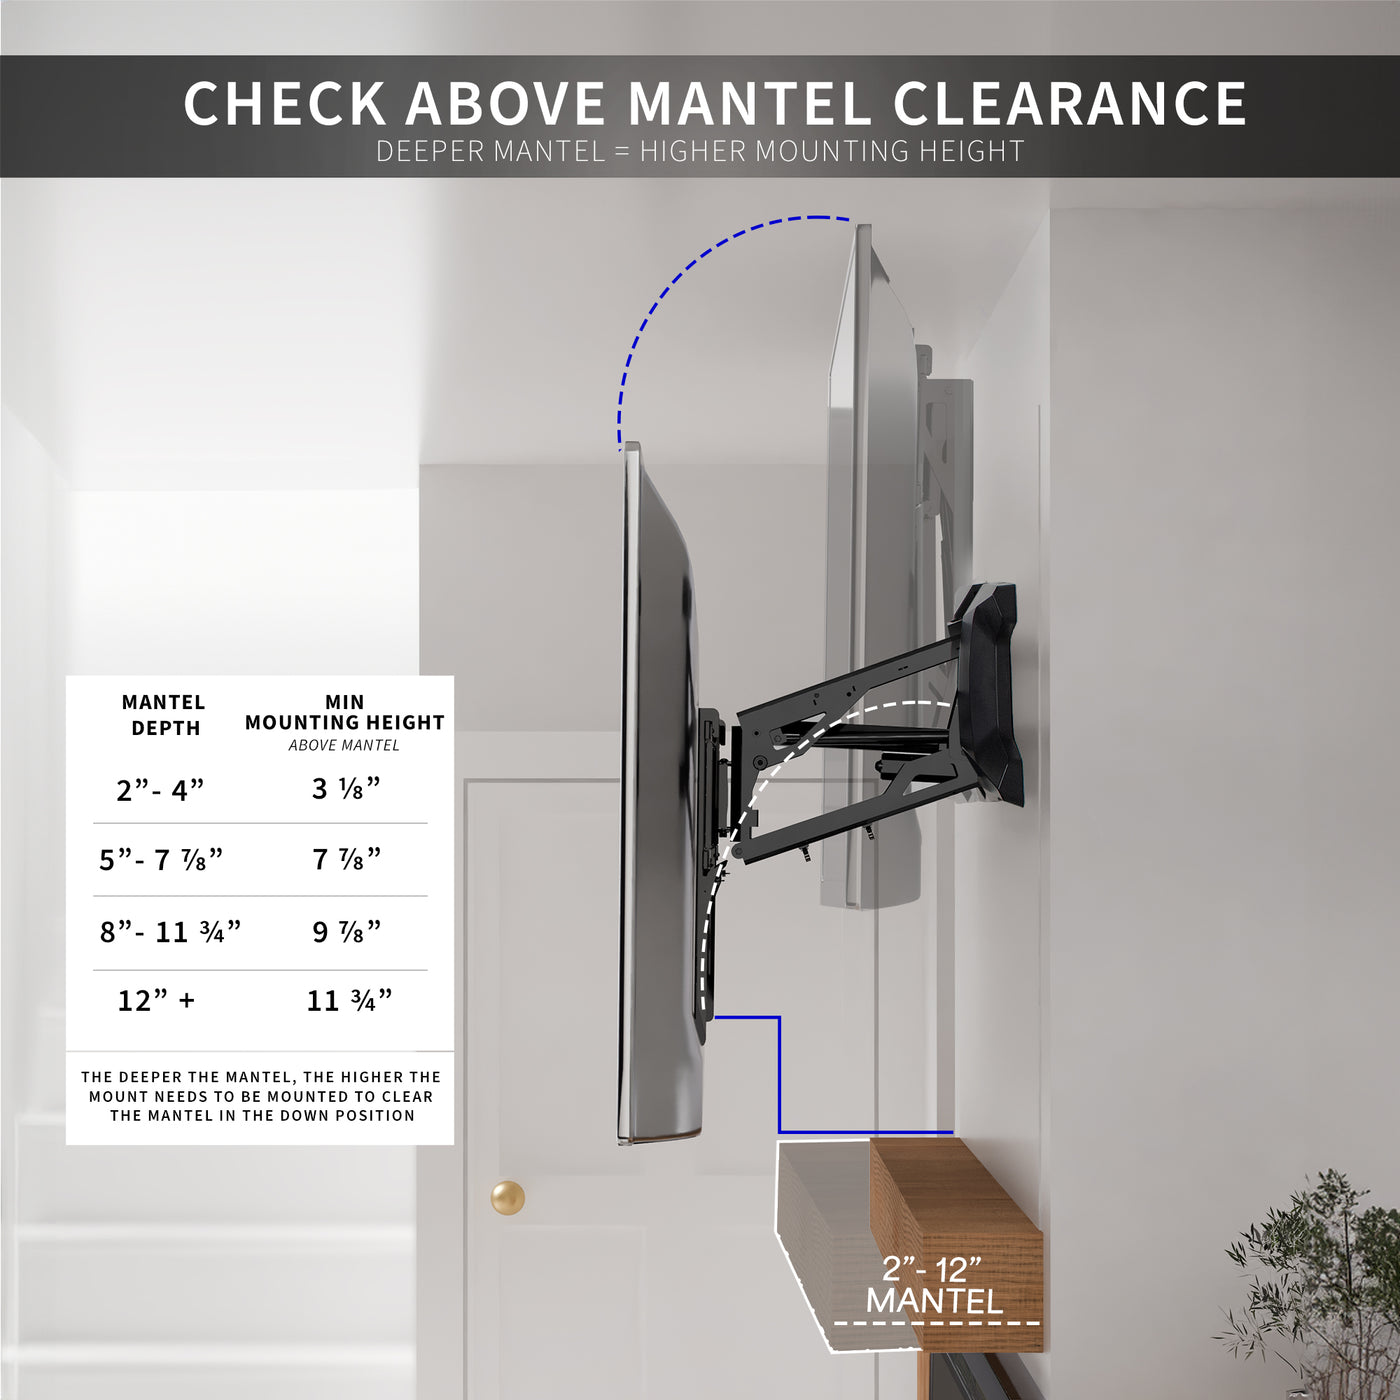 Check clearance above mantel.